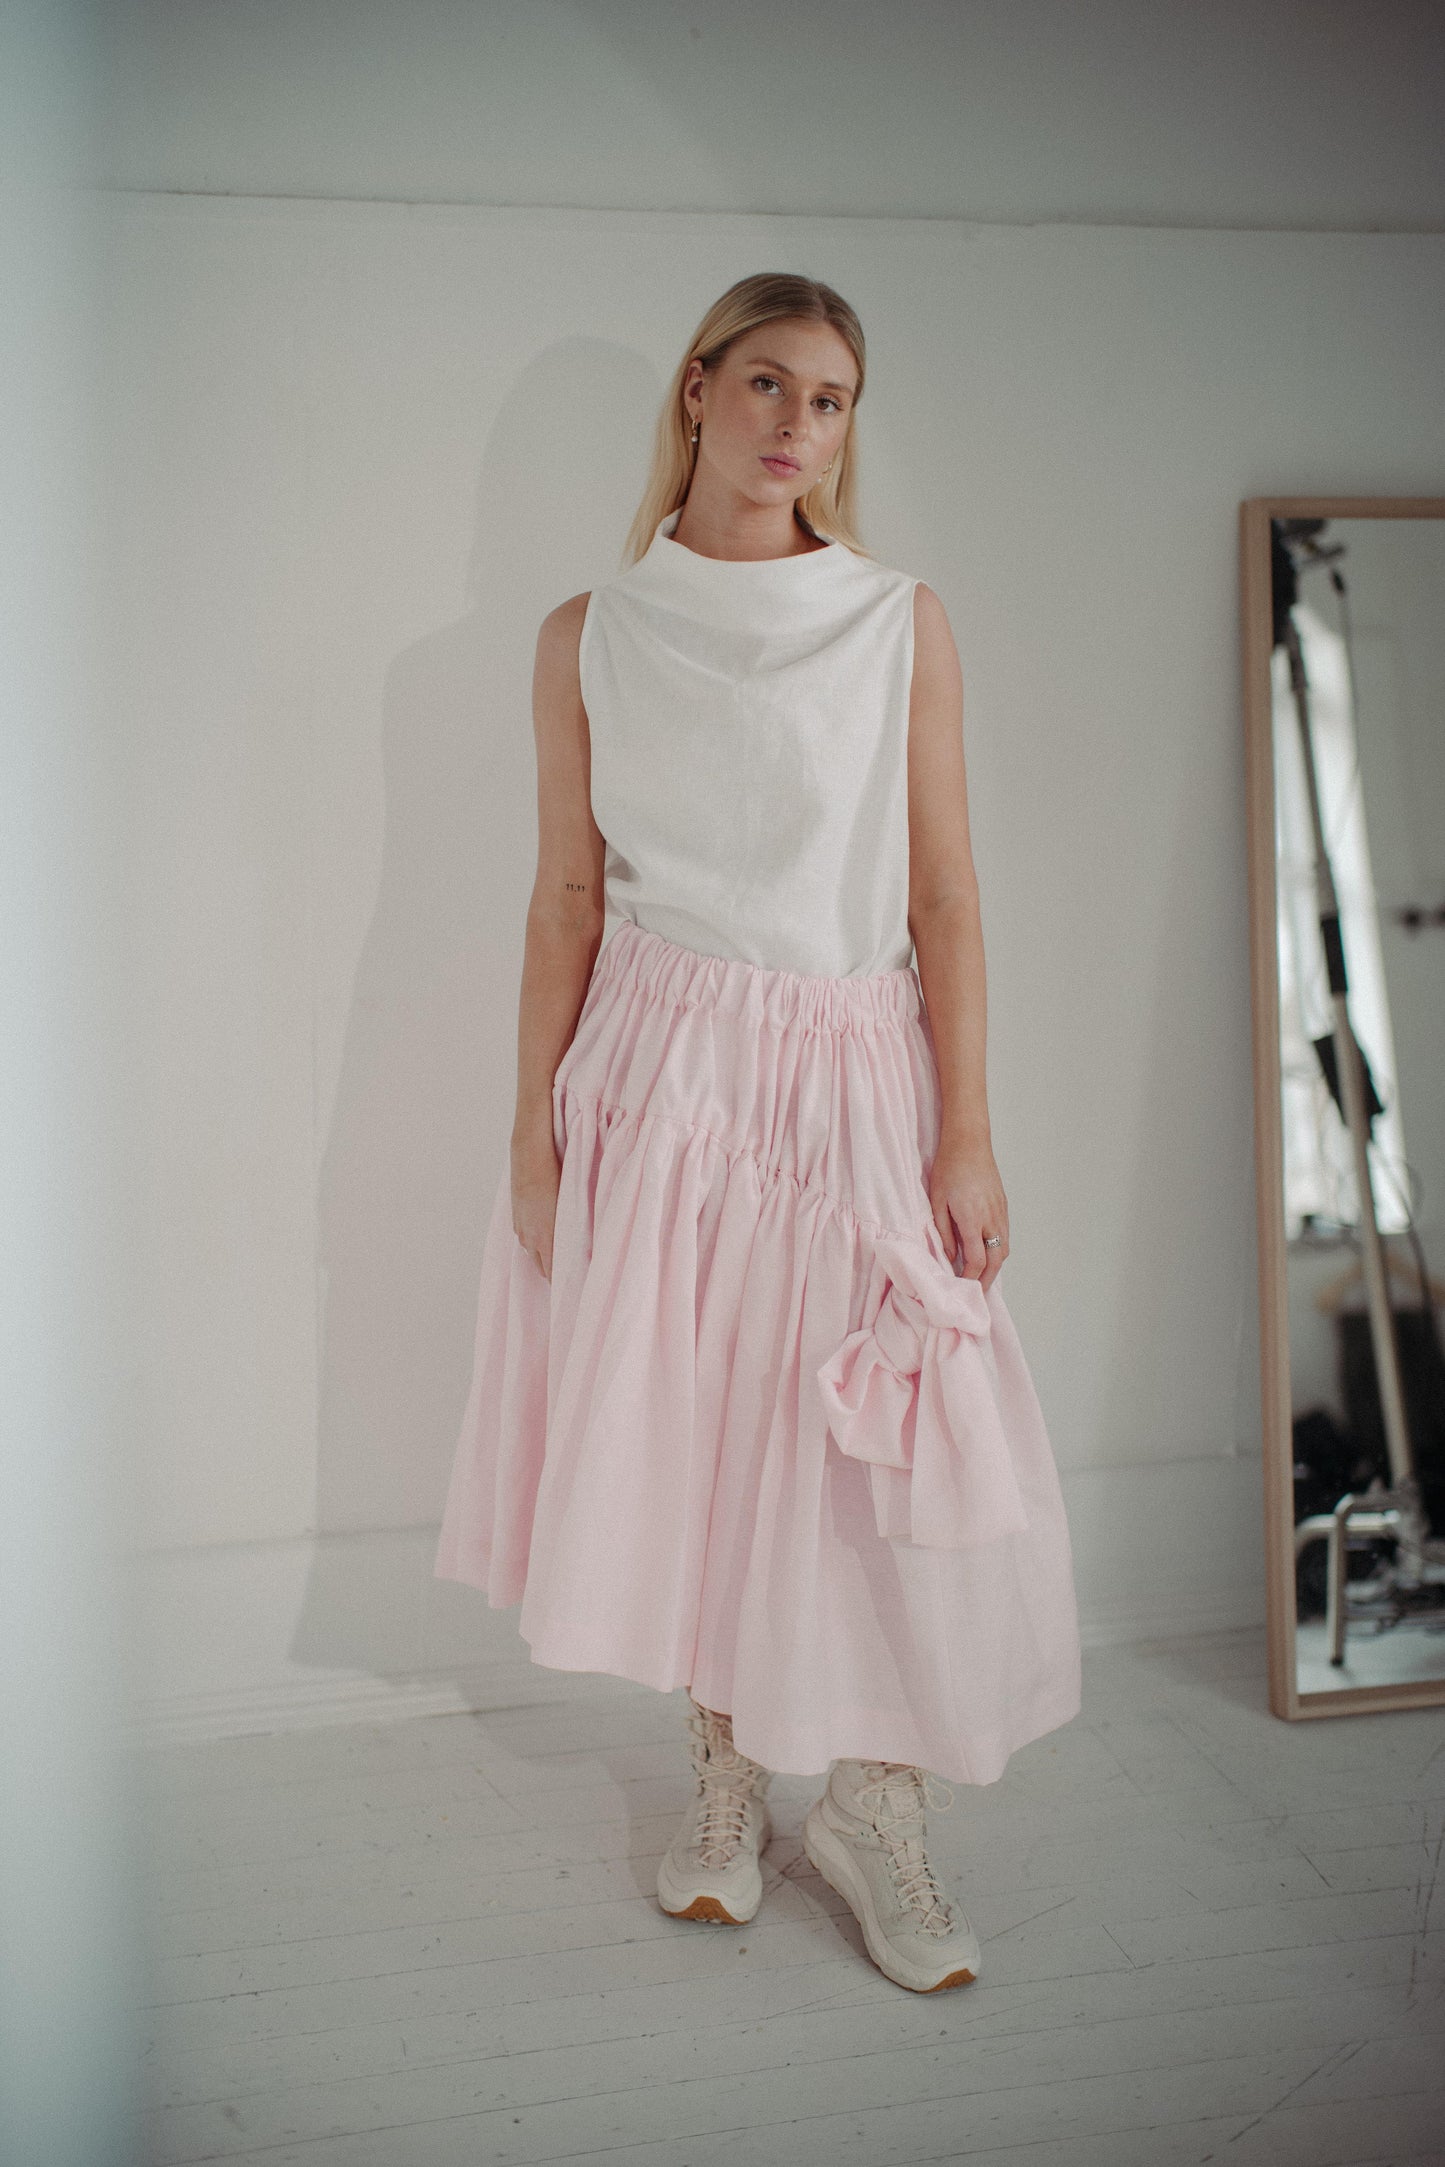 PINK TUTU | The linen tutu, now in the most whimsical, pretty pink - because no one ever really grows up enough to not want to wear a tutu! Voluminous, romantic and feminine, the tutu features two gathered layers with an oversized bow in a luxurious dark